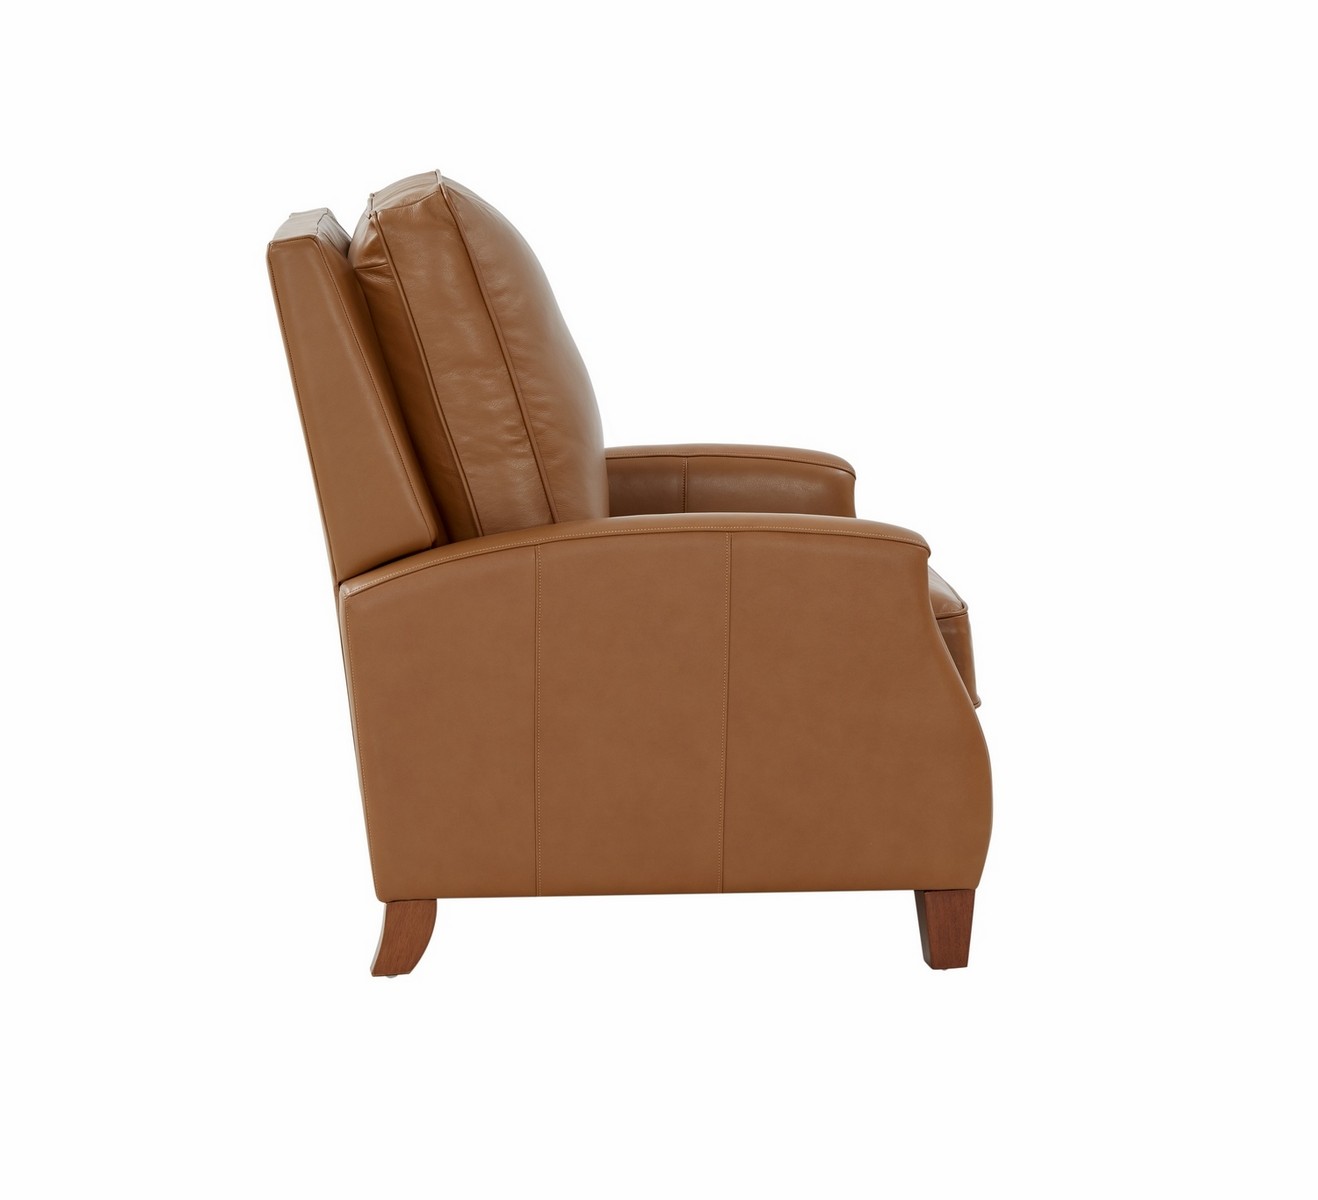 Barcalounger Penrose Recliner Chair - Shoreham Ponytail/All Leather